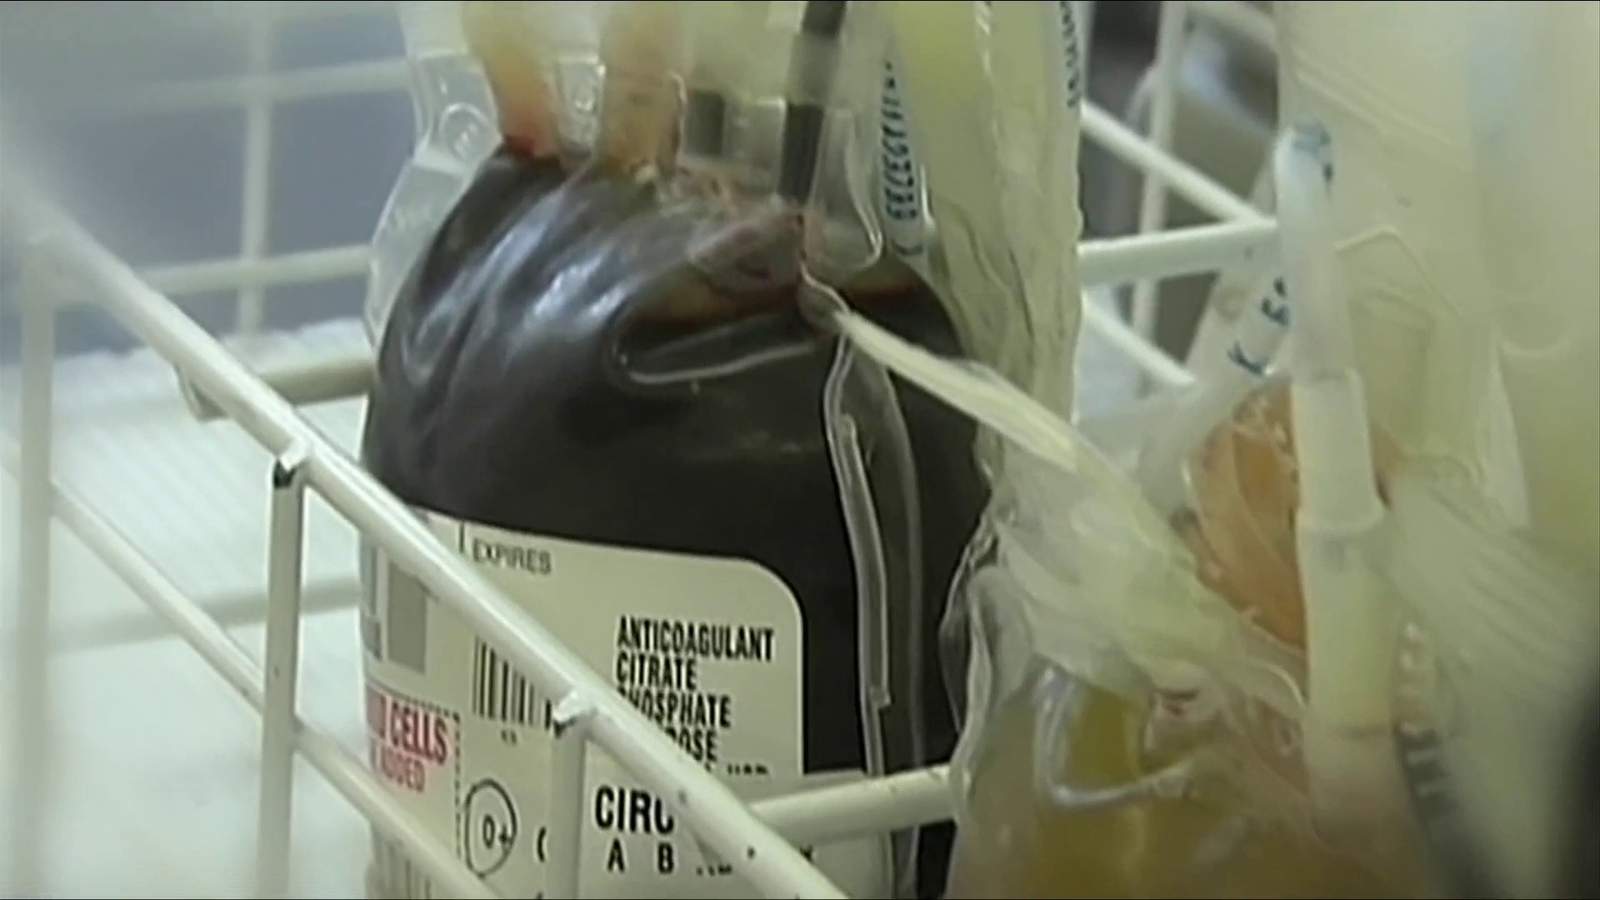 Red Cross in need of blood donors amid COVID pandemic